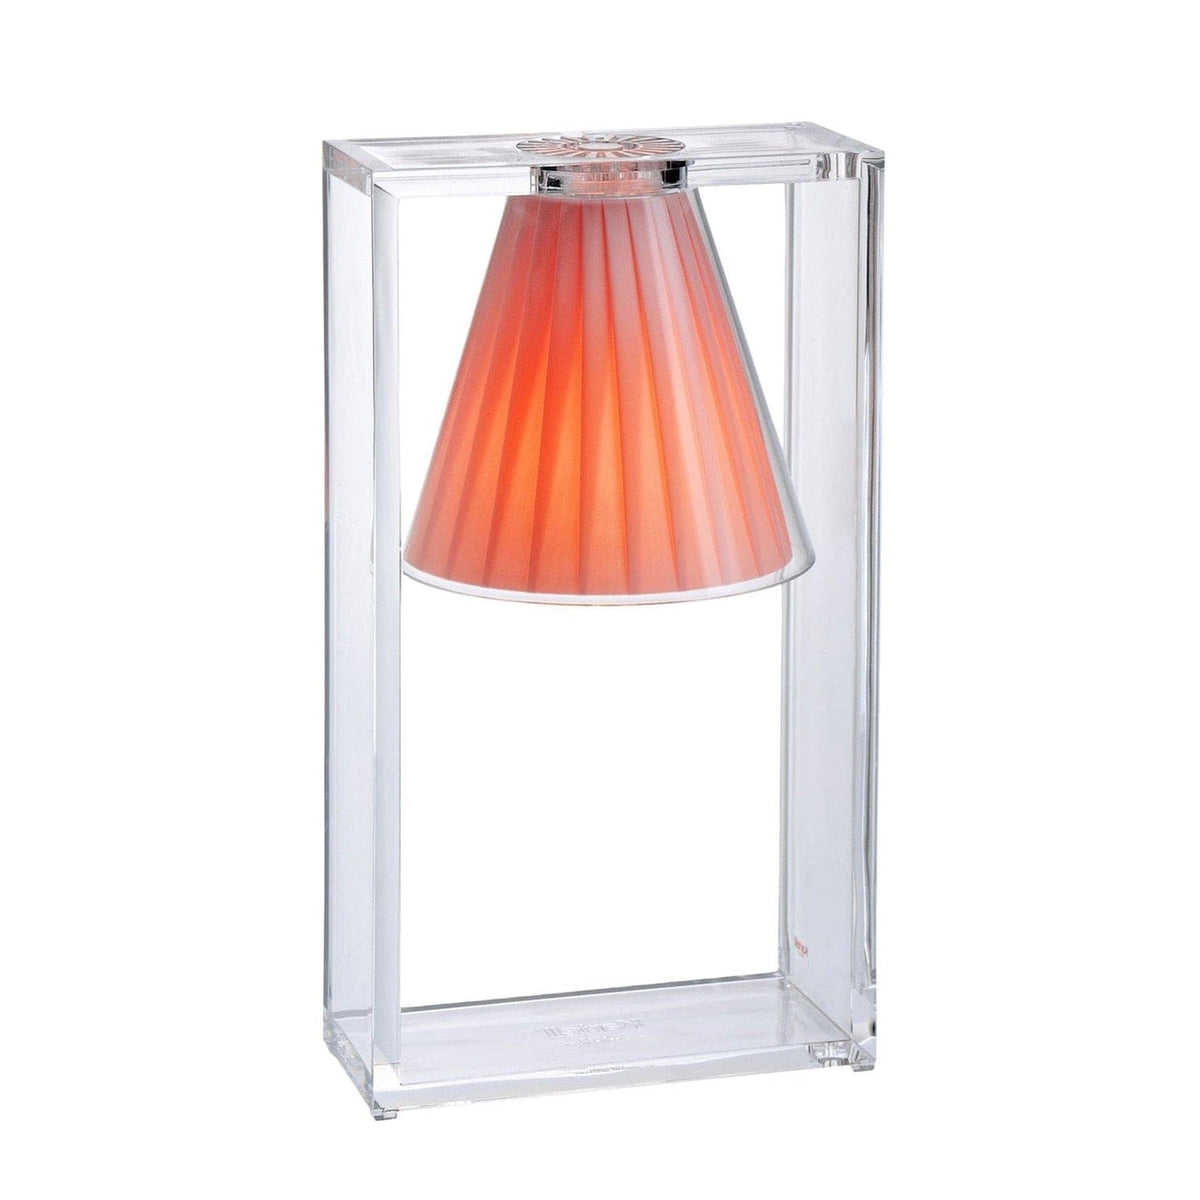 A pink pleated table lamp by Kartell.